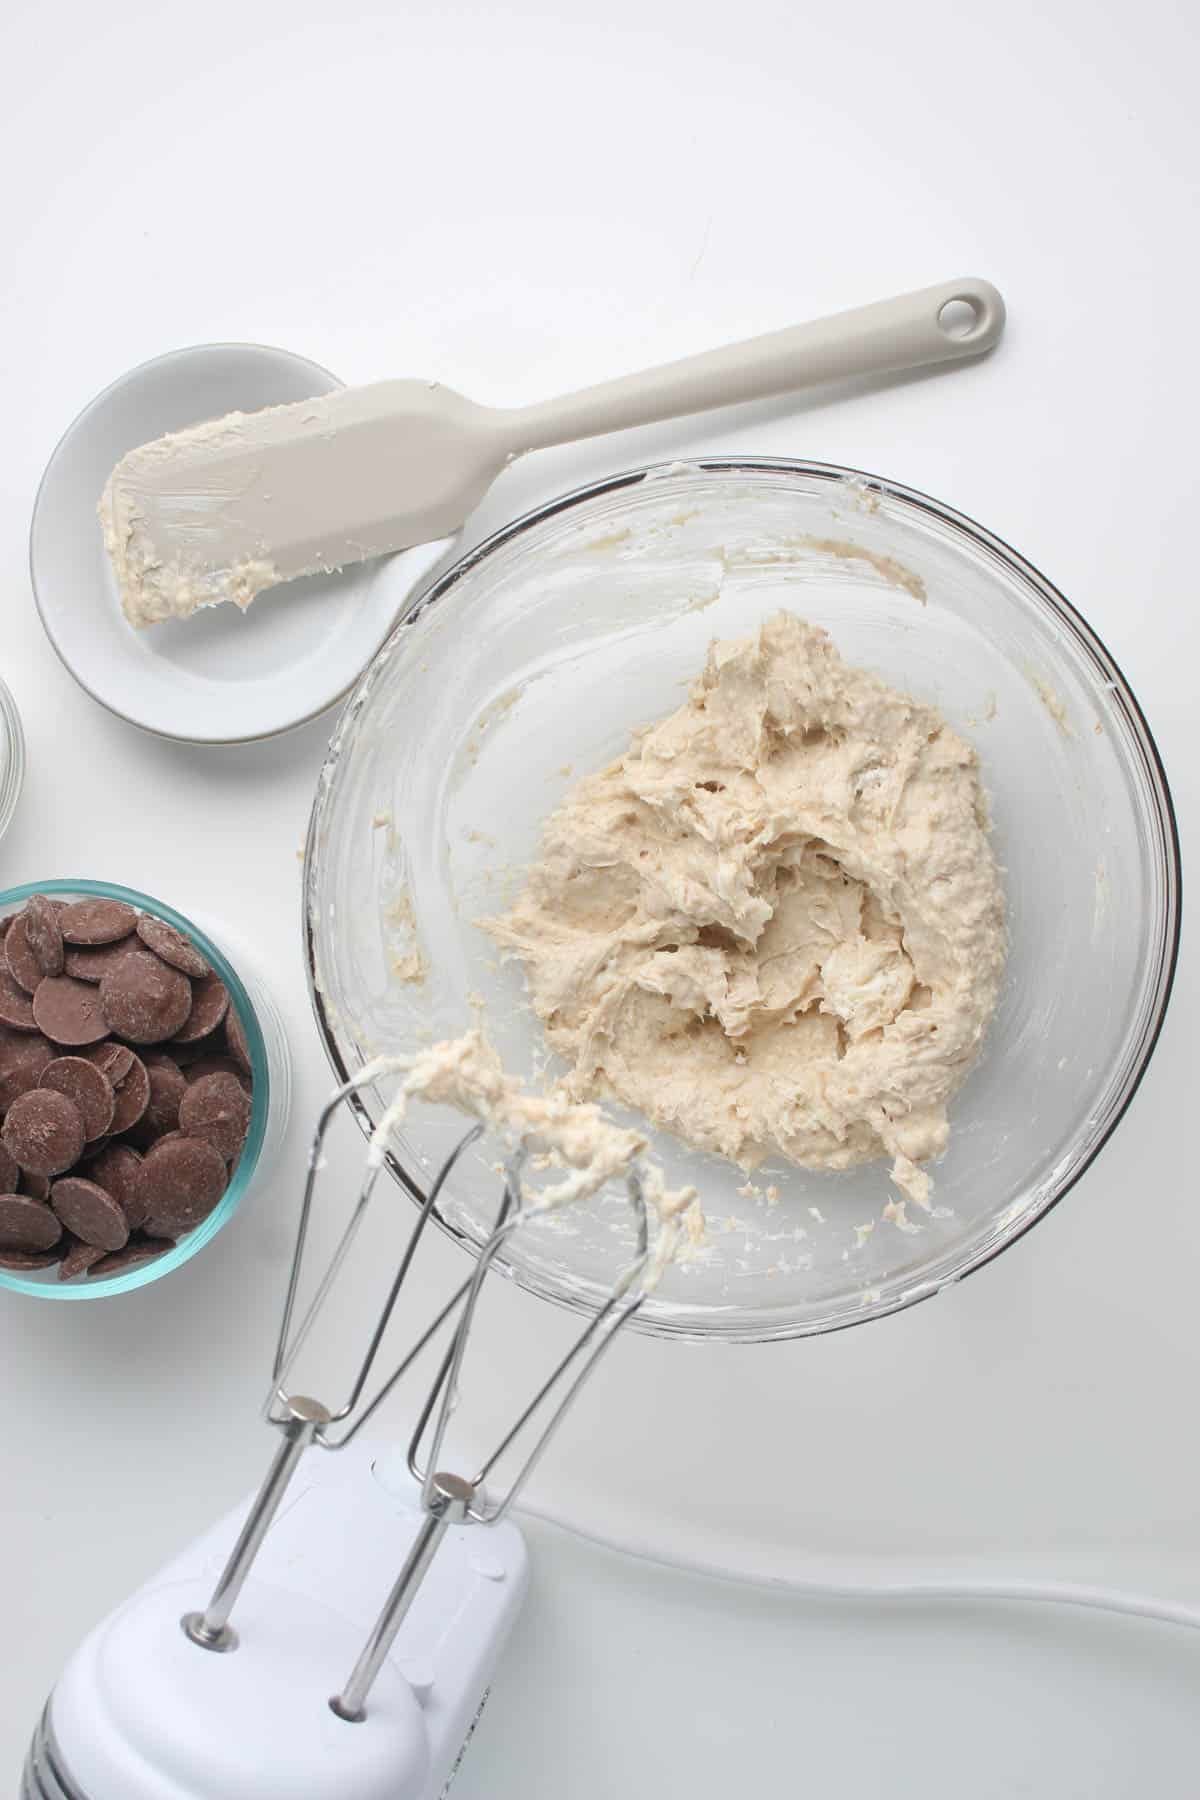 Mixing cheesecake truffle ingredients together in a bowl with a hand mixer.